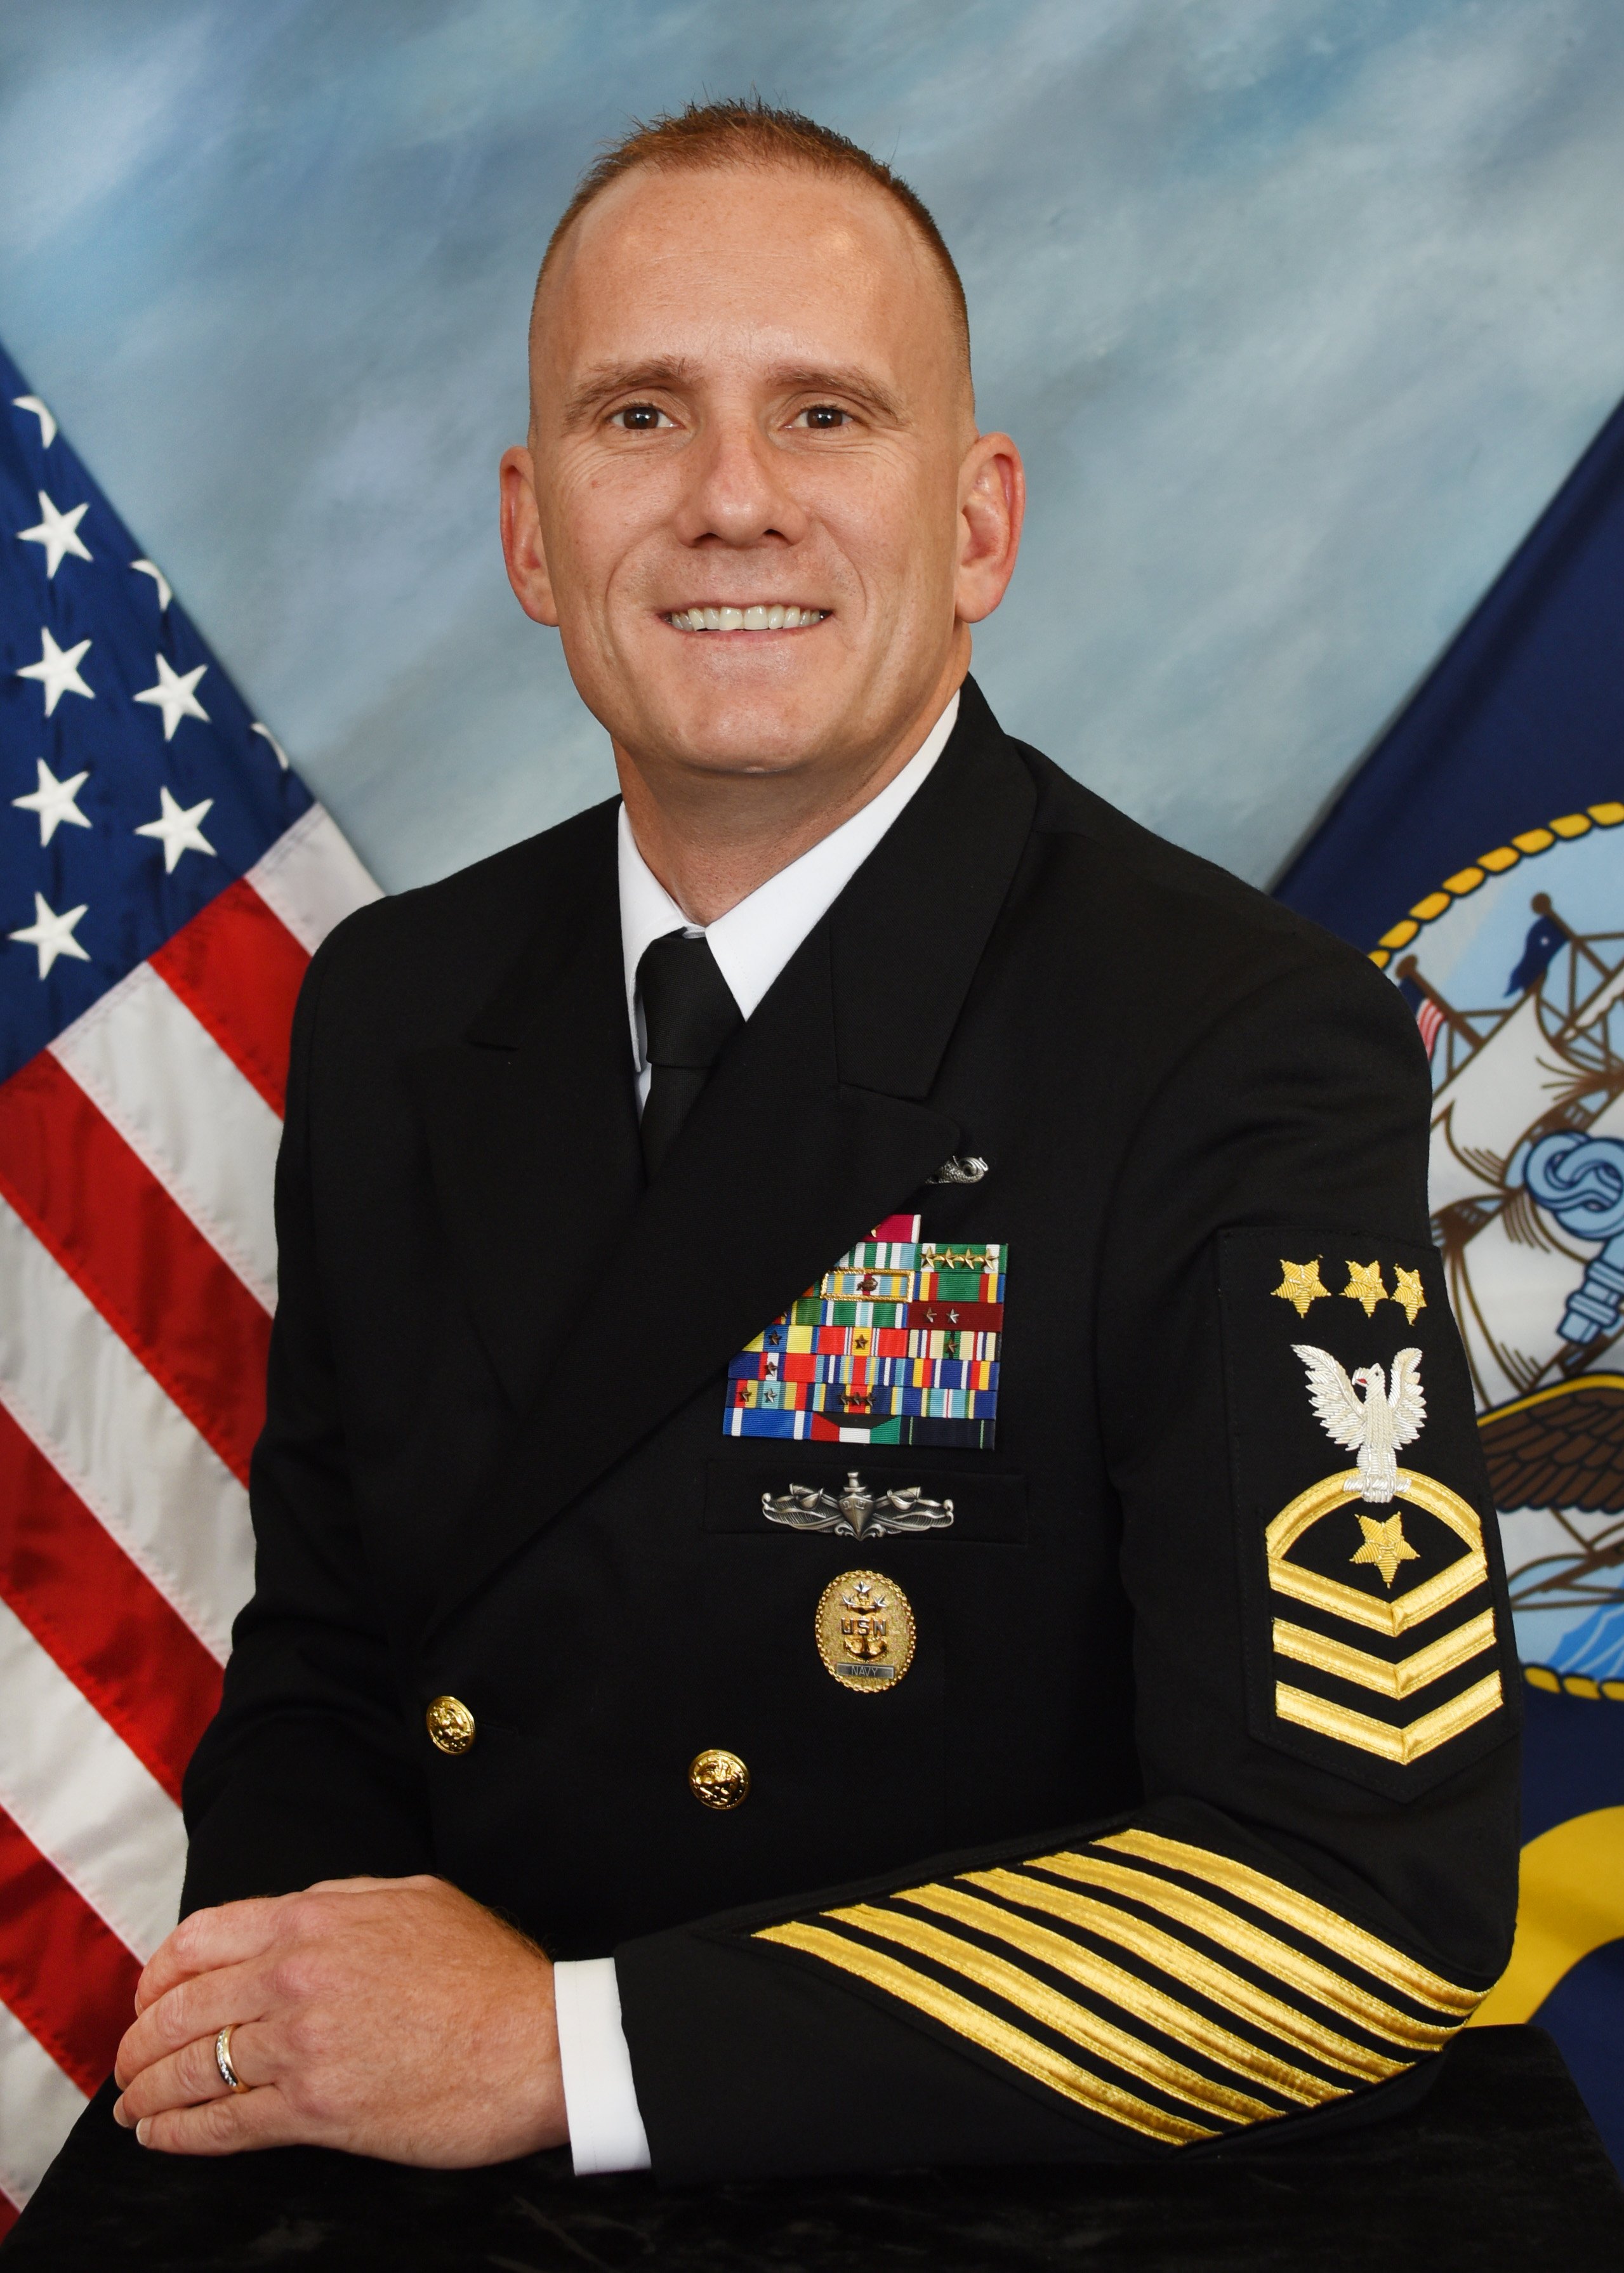 Fleet Master Chief Steven Giordano has been selected as the 14th Master Chief Petty Officer of the Navy (MCPON). US Navy Photo